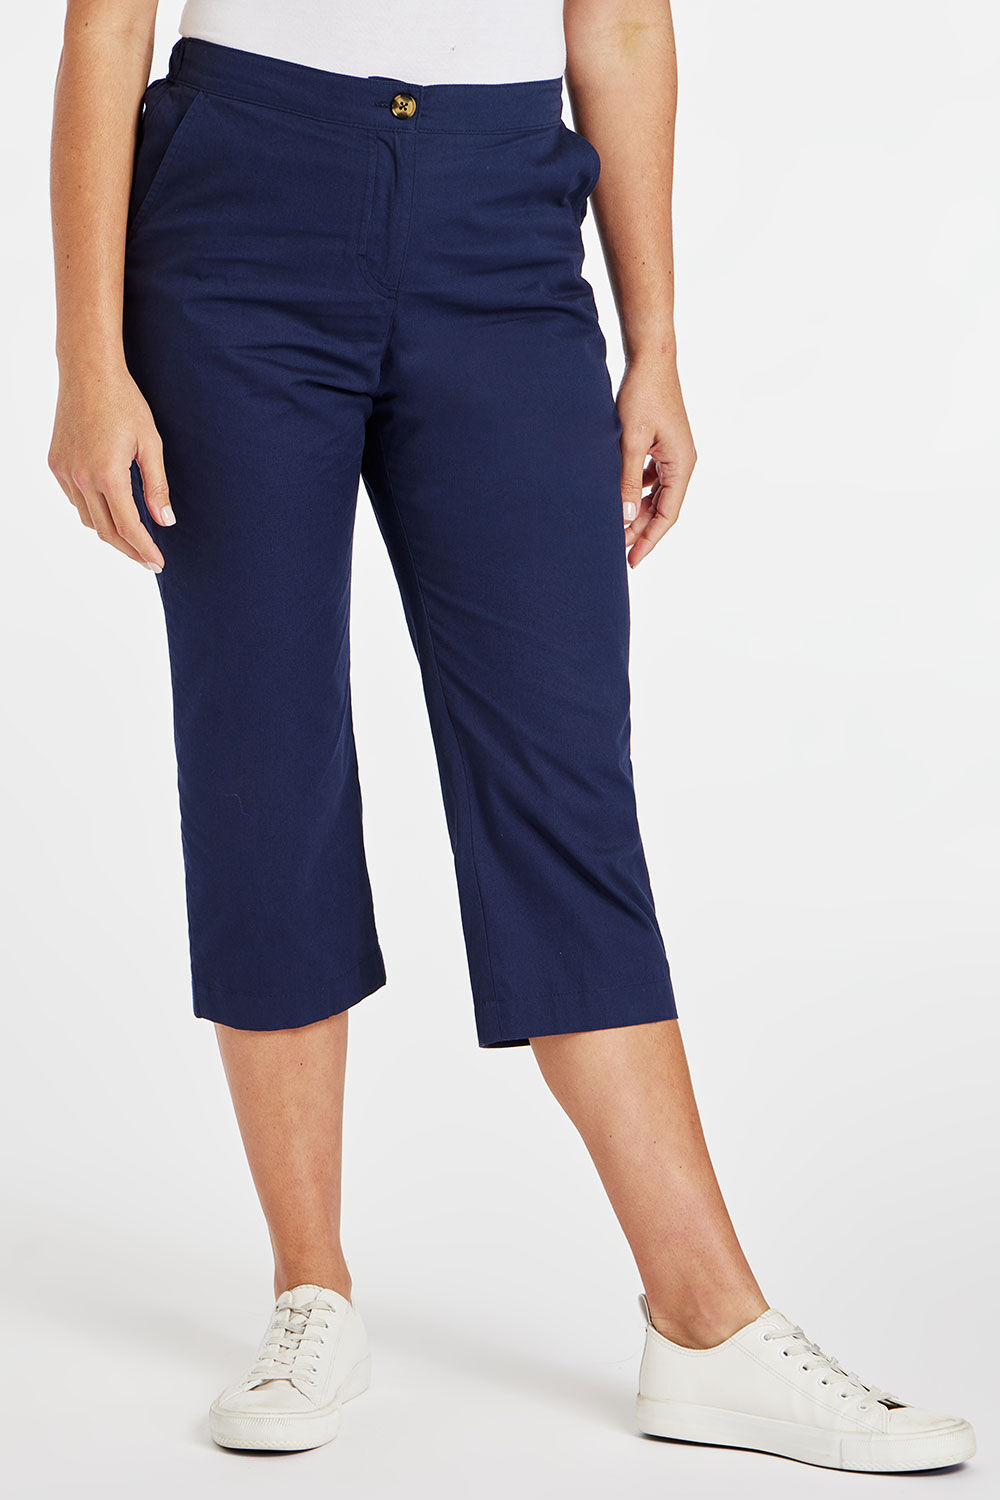 Bonmarche Navy Cropped Elasticated Trousers, Size: 14